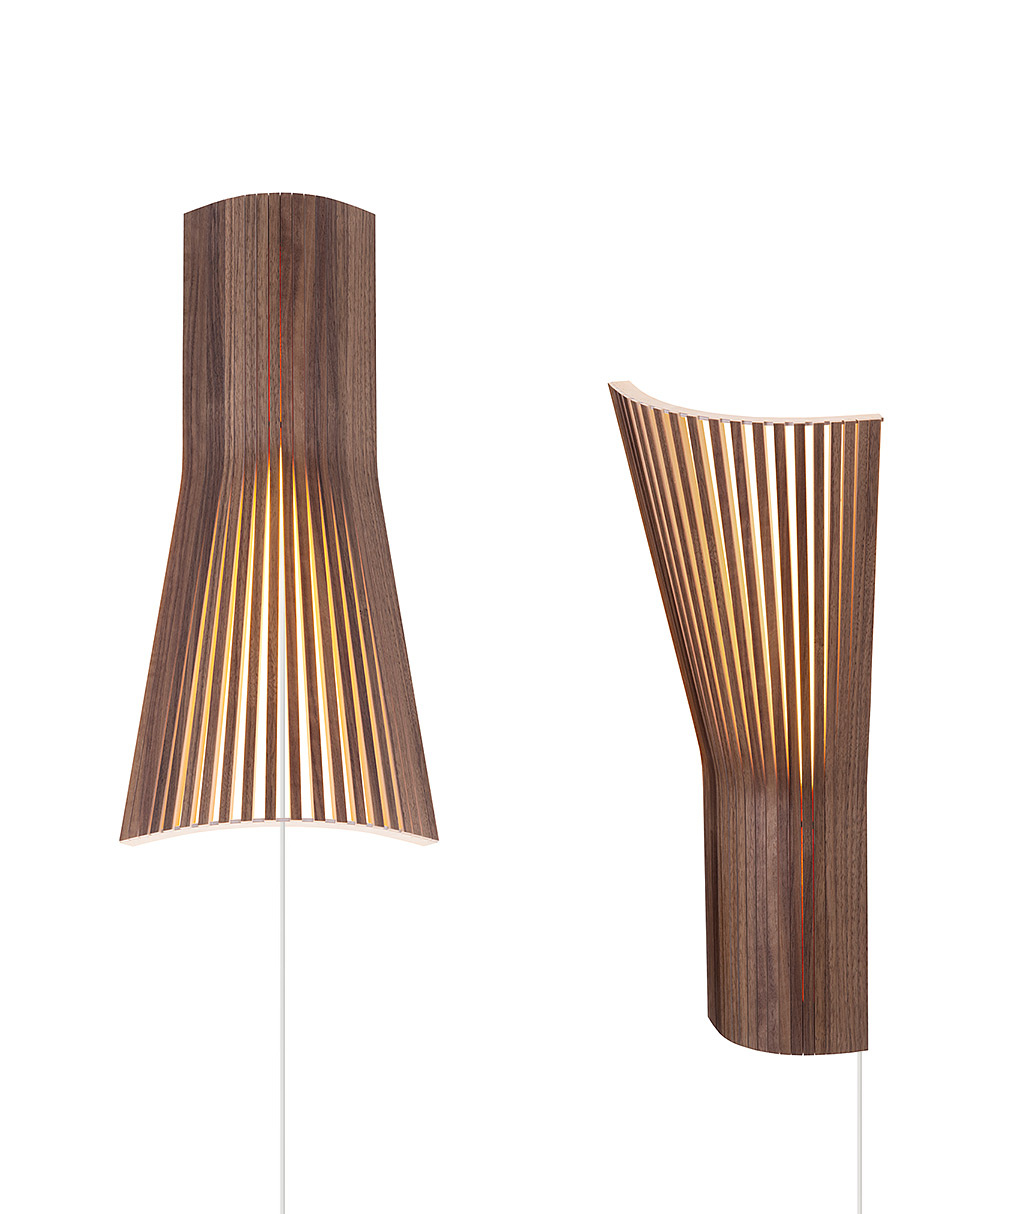 Secto Small 4237 corner lamp is available in walnut veneer